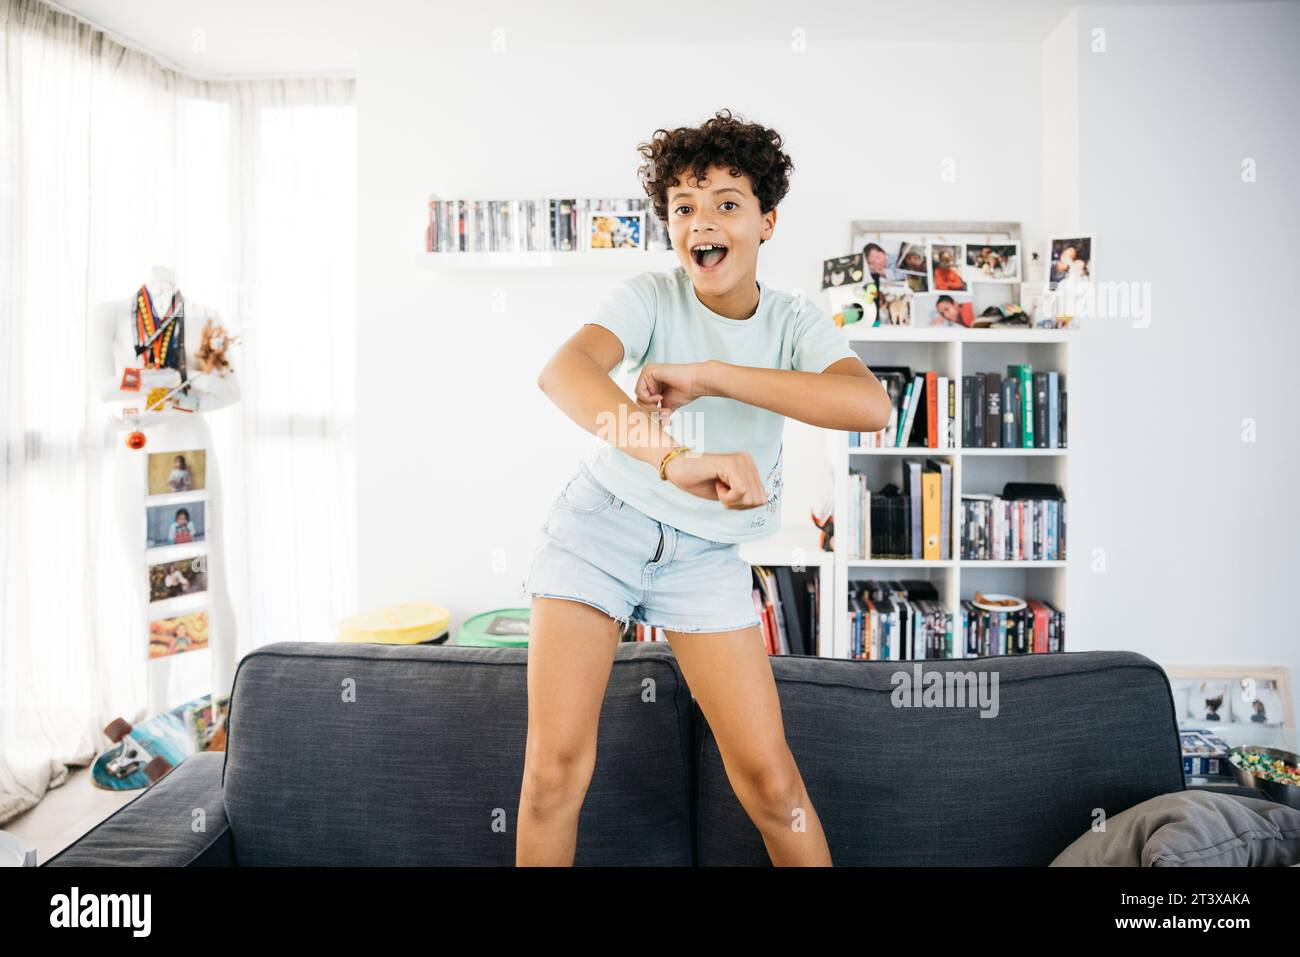 Happy ten years old girl dancing on a sofa in a living room. Girl dancing and having fun while dancing on the sofa of a living room. Stock Photo